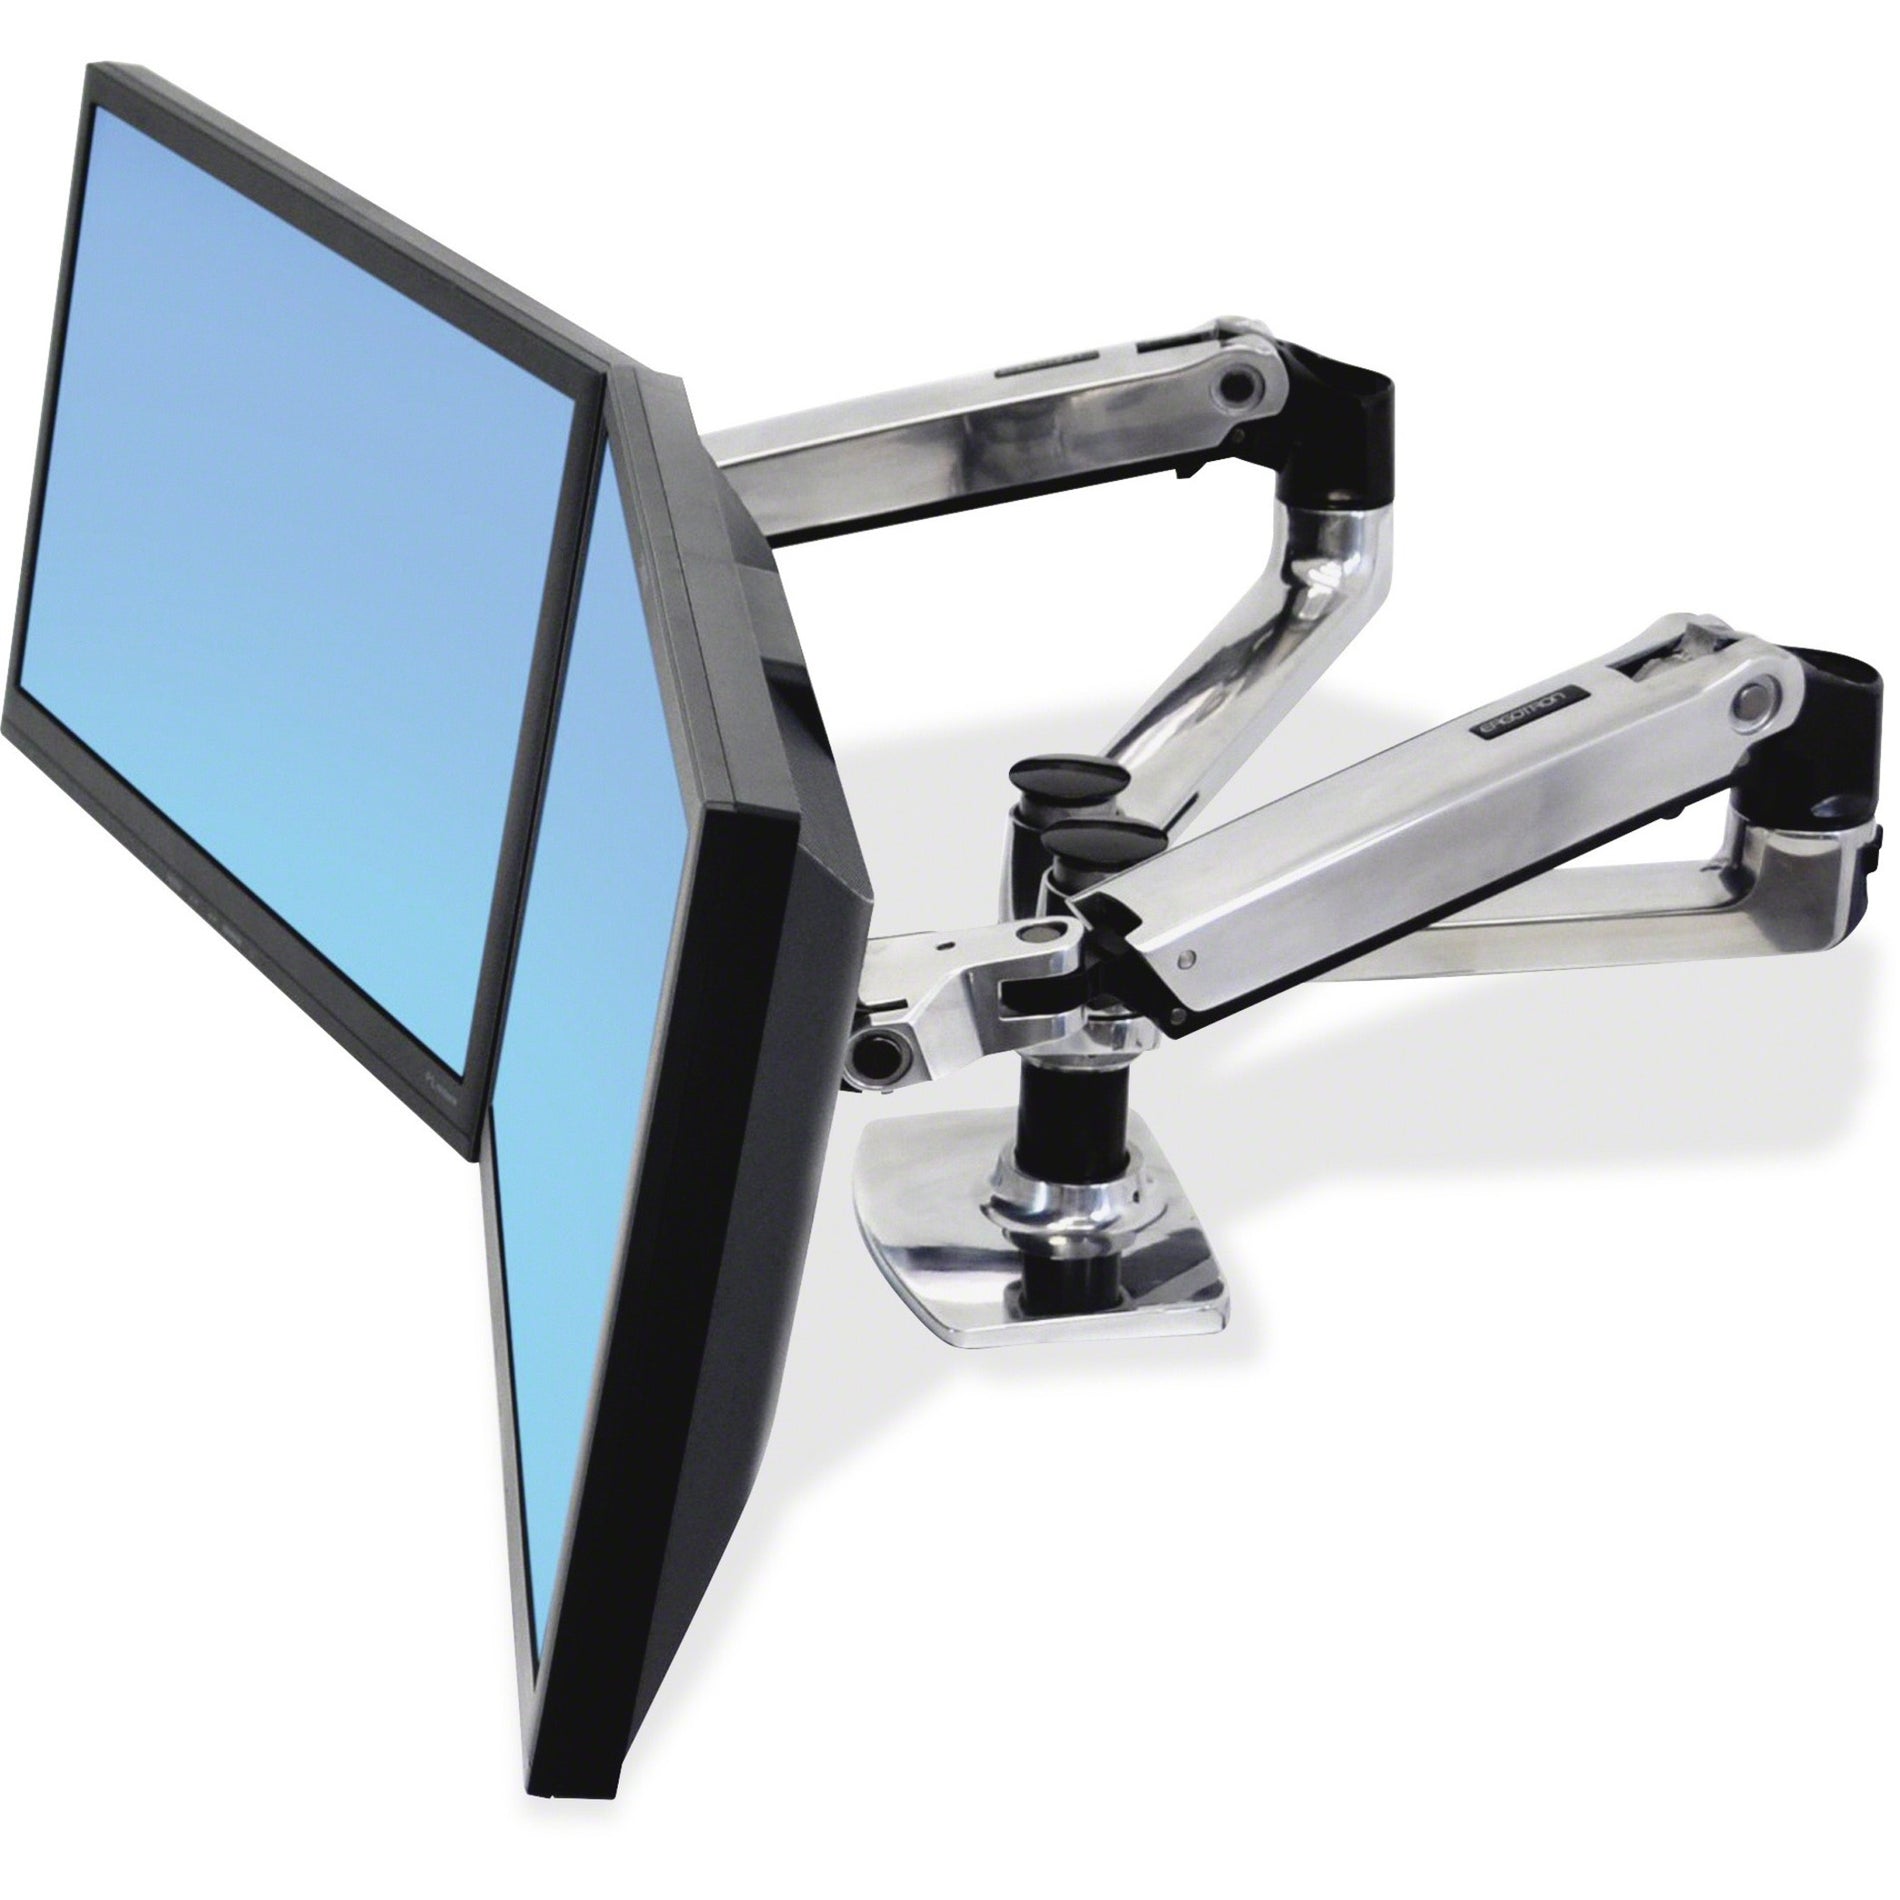 Ergotron 45 245 026 LX Dual Side-by-Side Arm, Swivel, Tilt, 40 lb Load Capacity, 27" Screen Size Supported